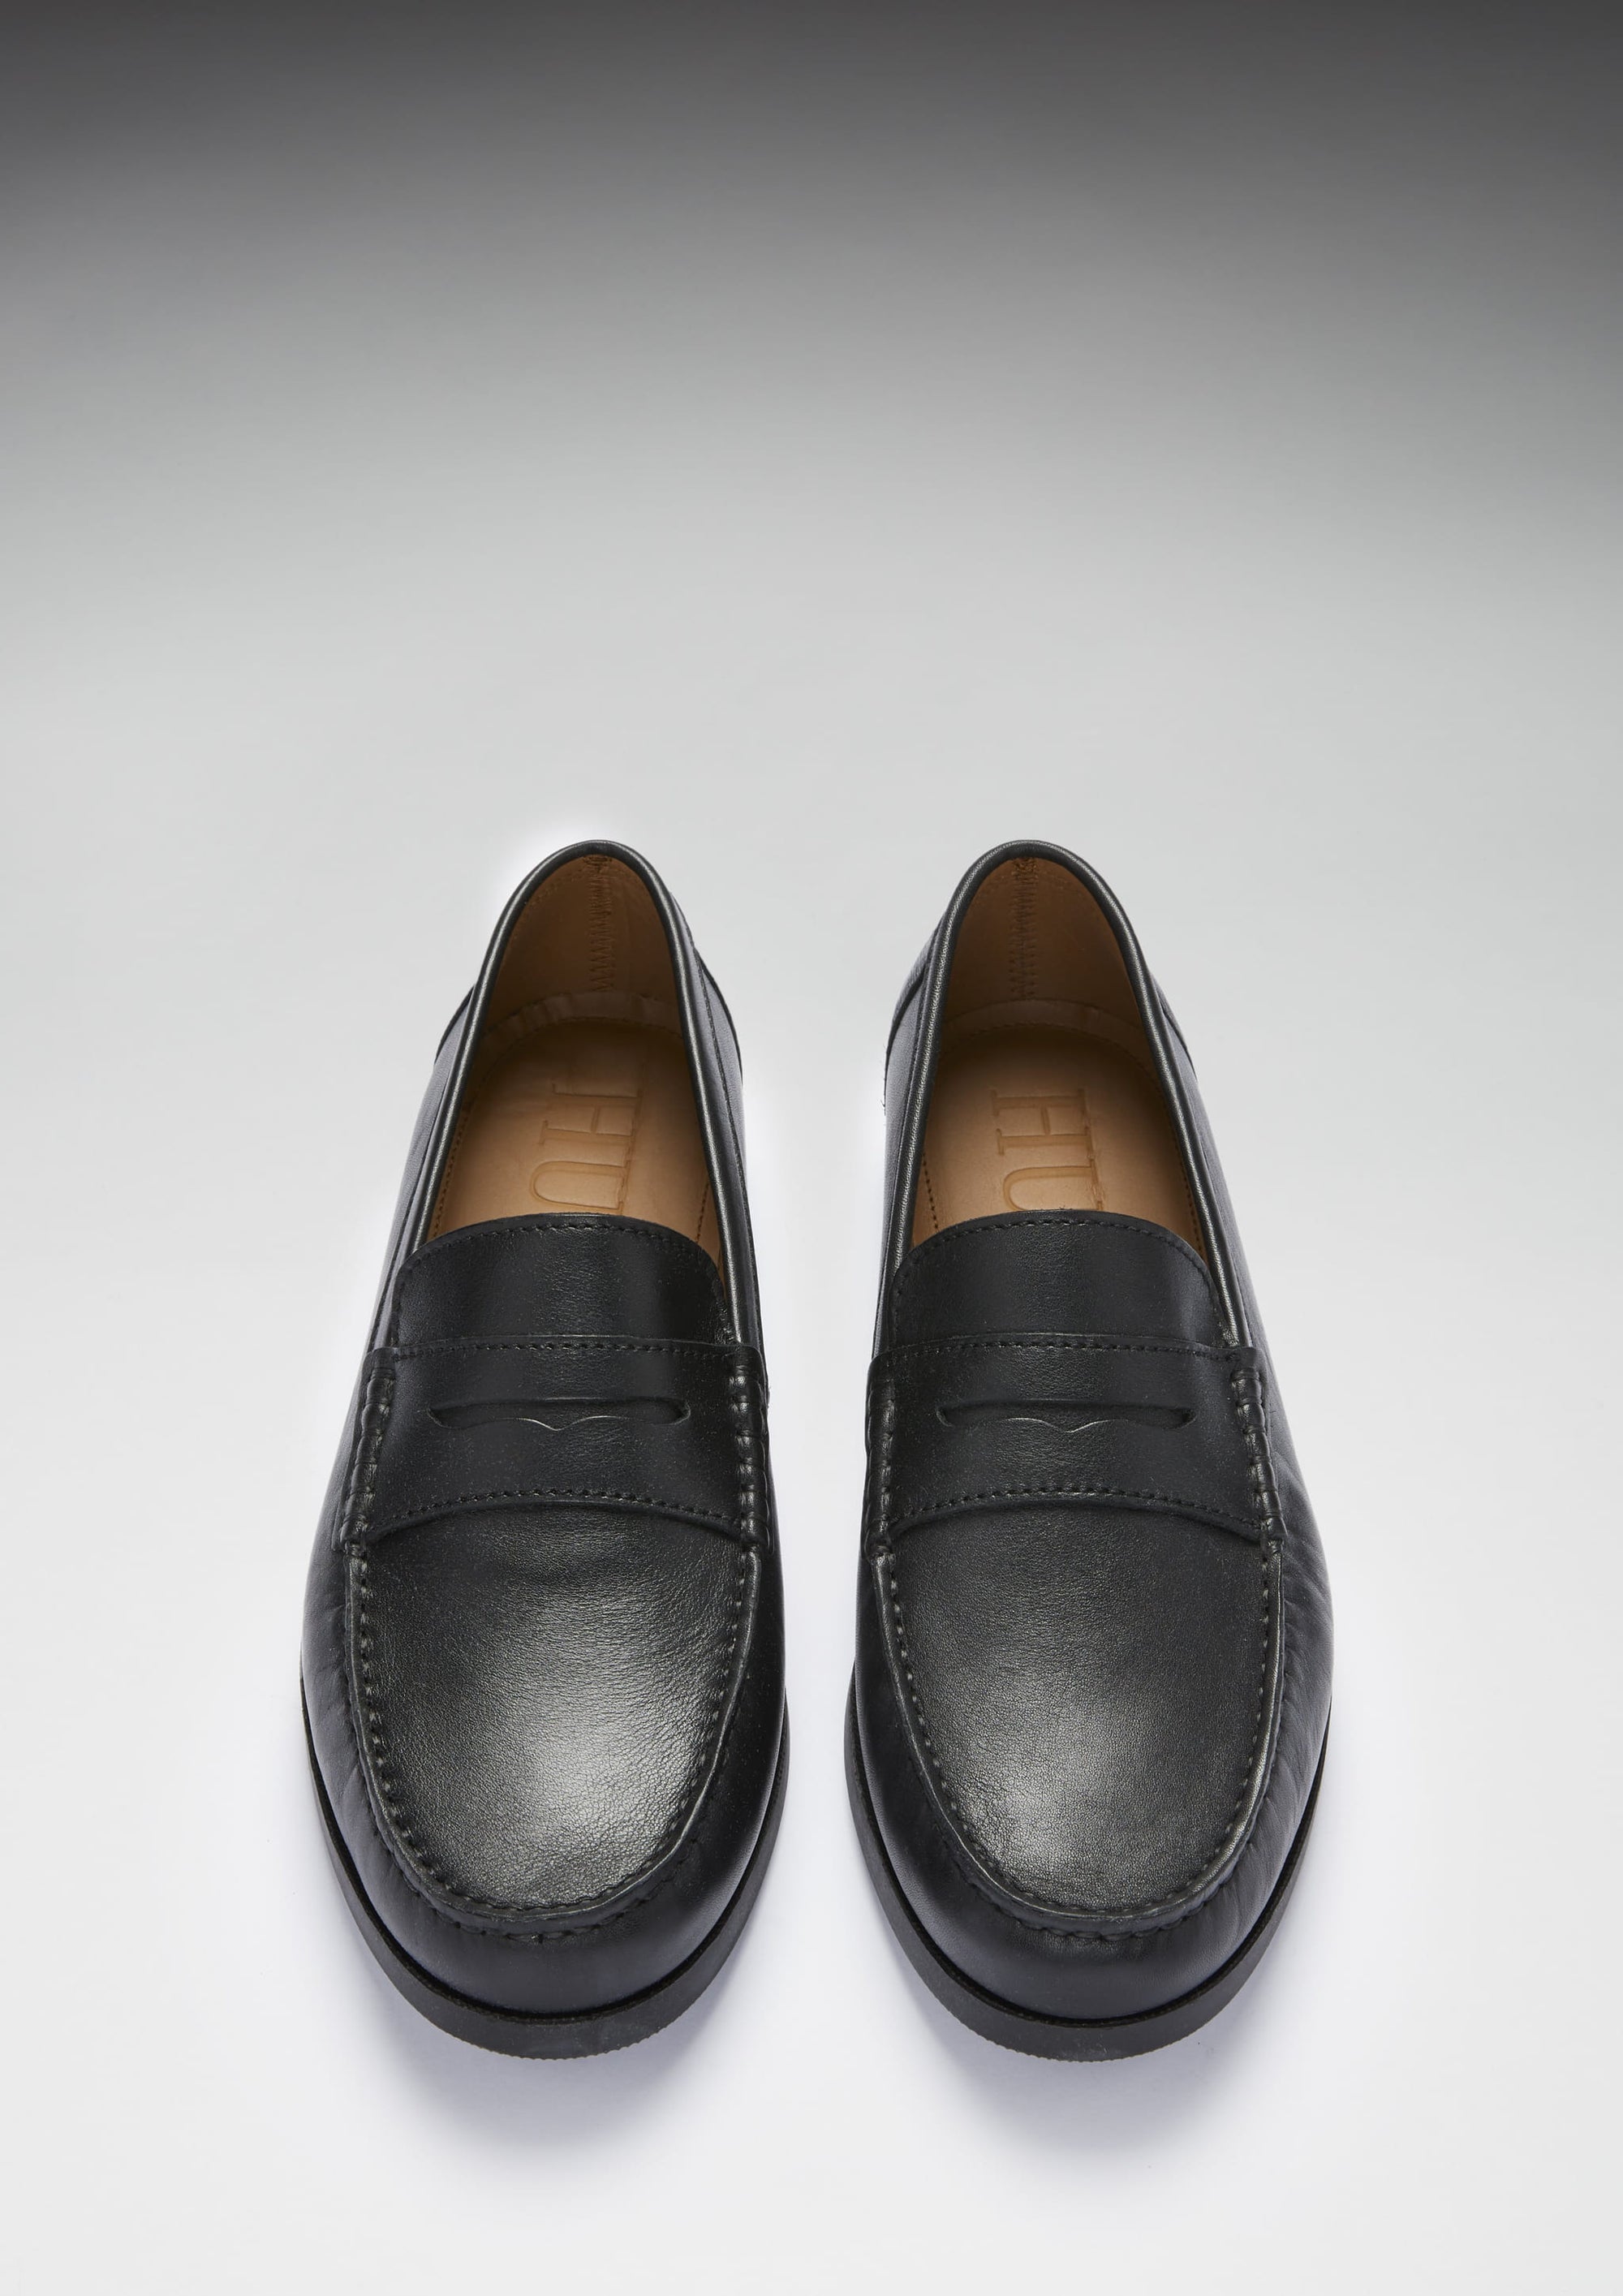 Top, Boat Loafers, black leather, Hugs & Co.